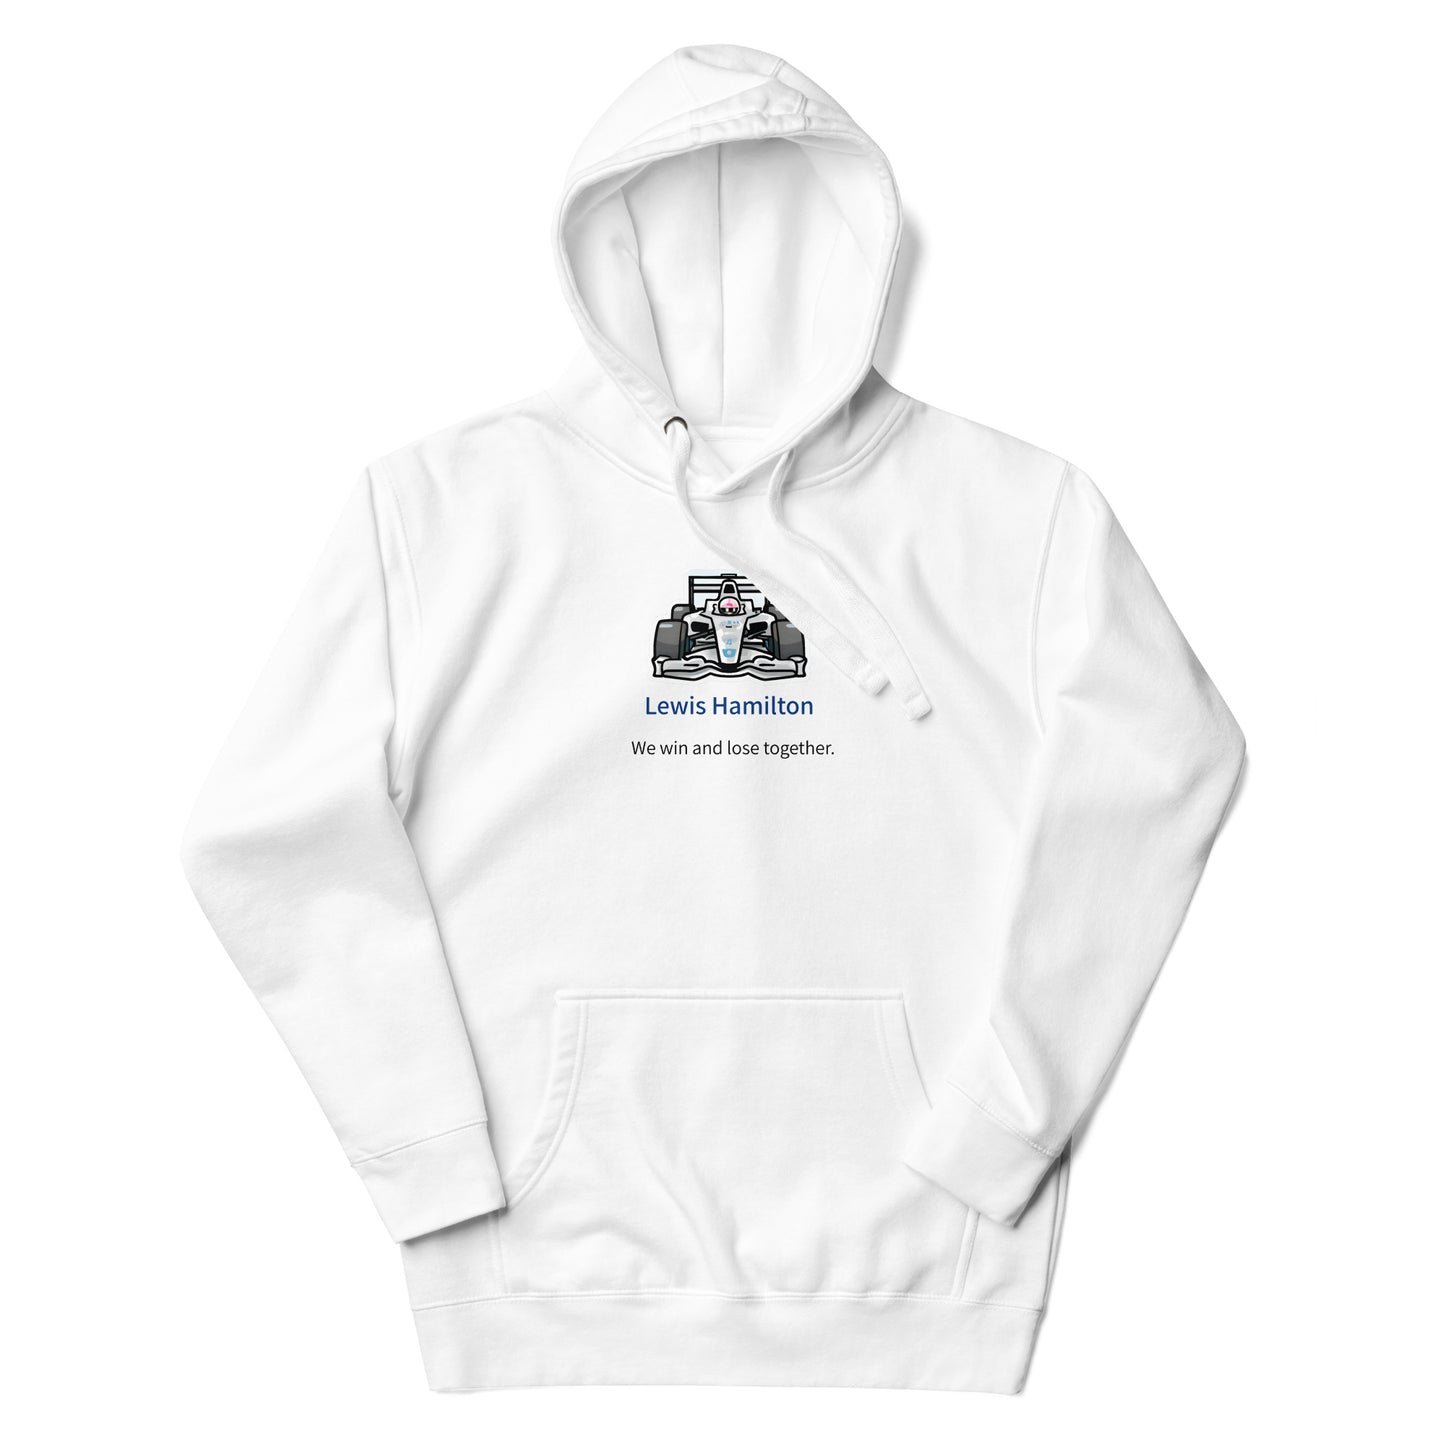 unfolded hoodie on white surface